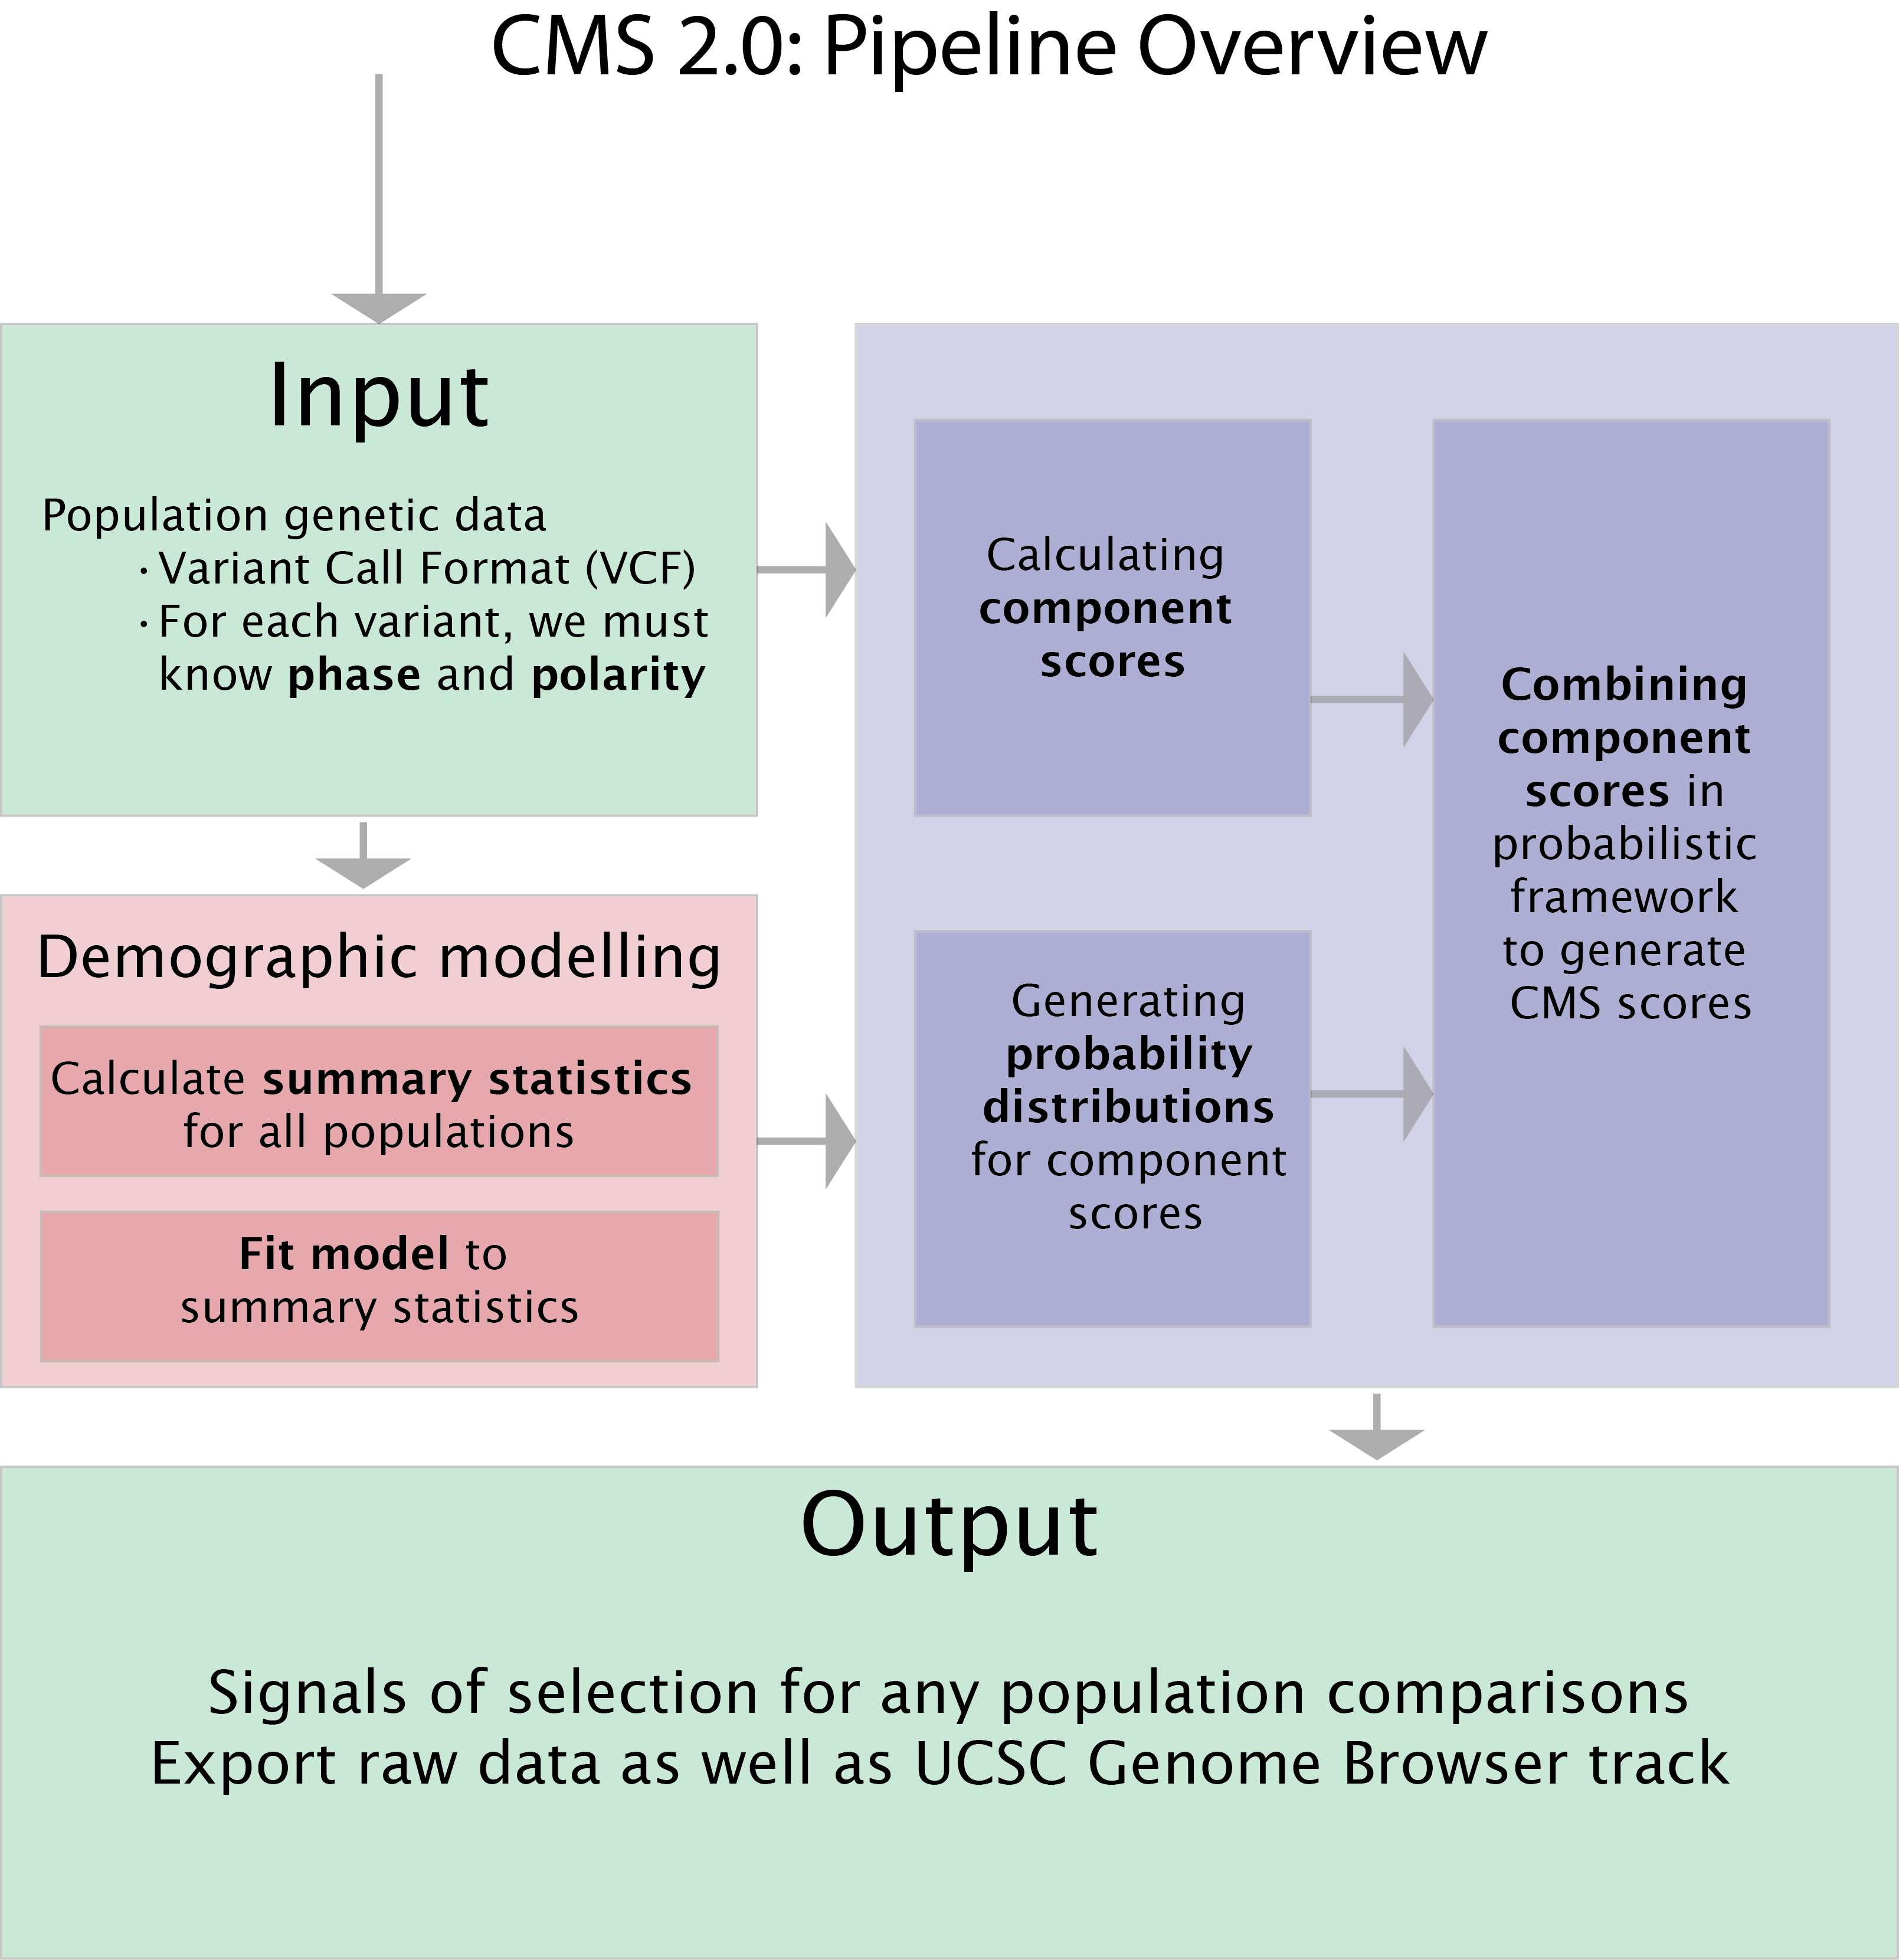 _images/cms_2.0_pipeline.png